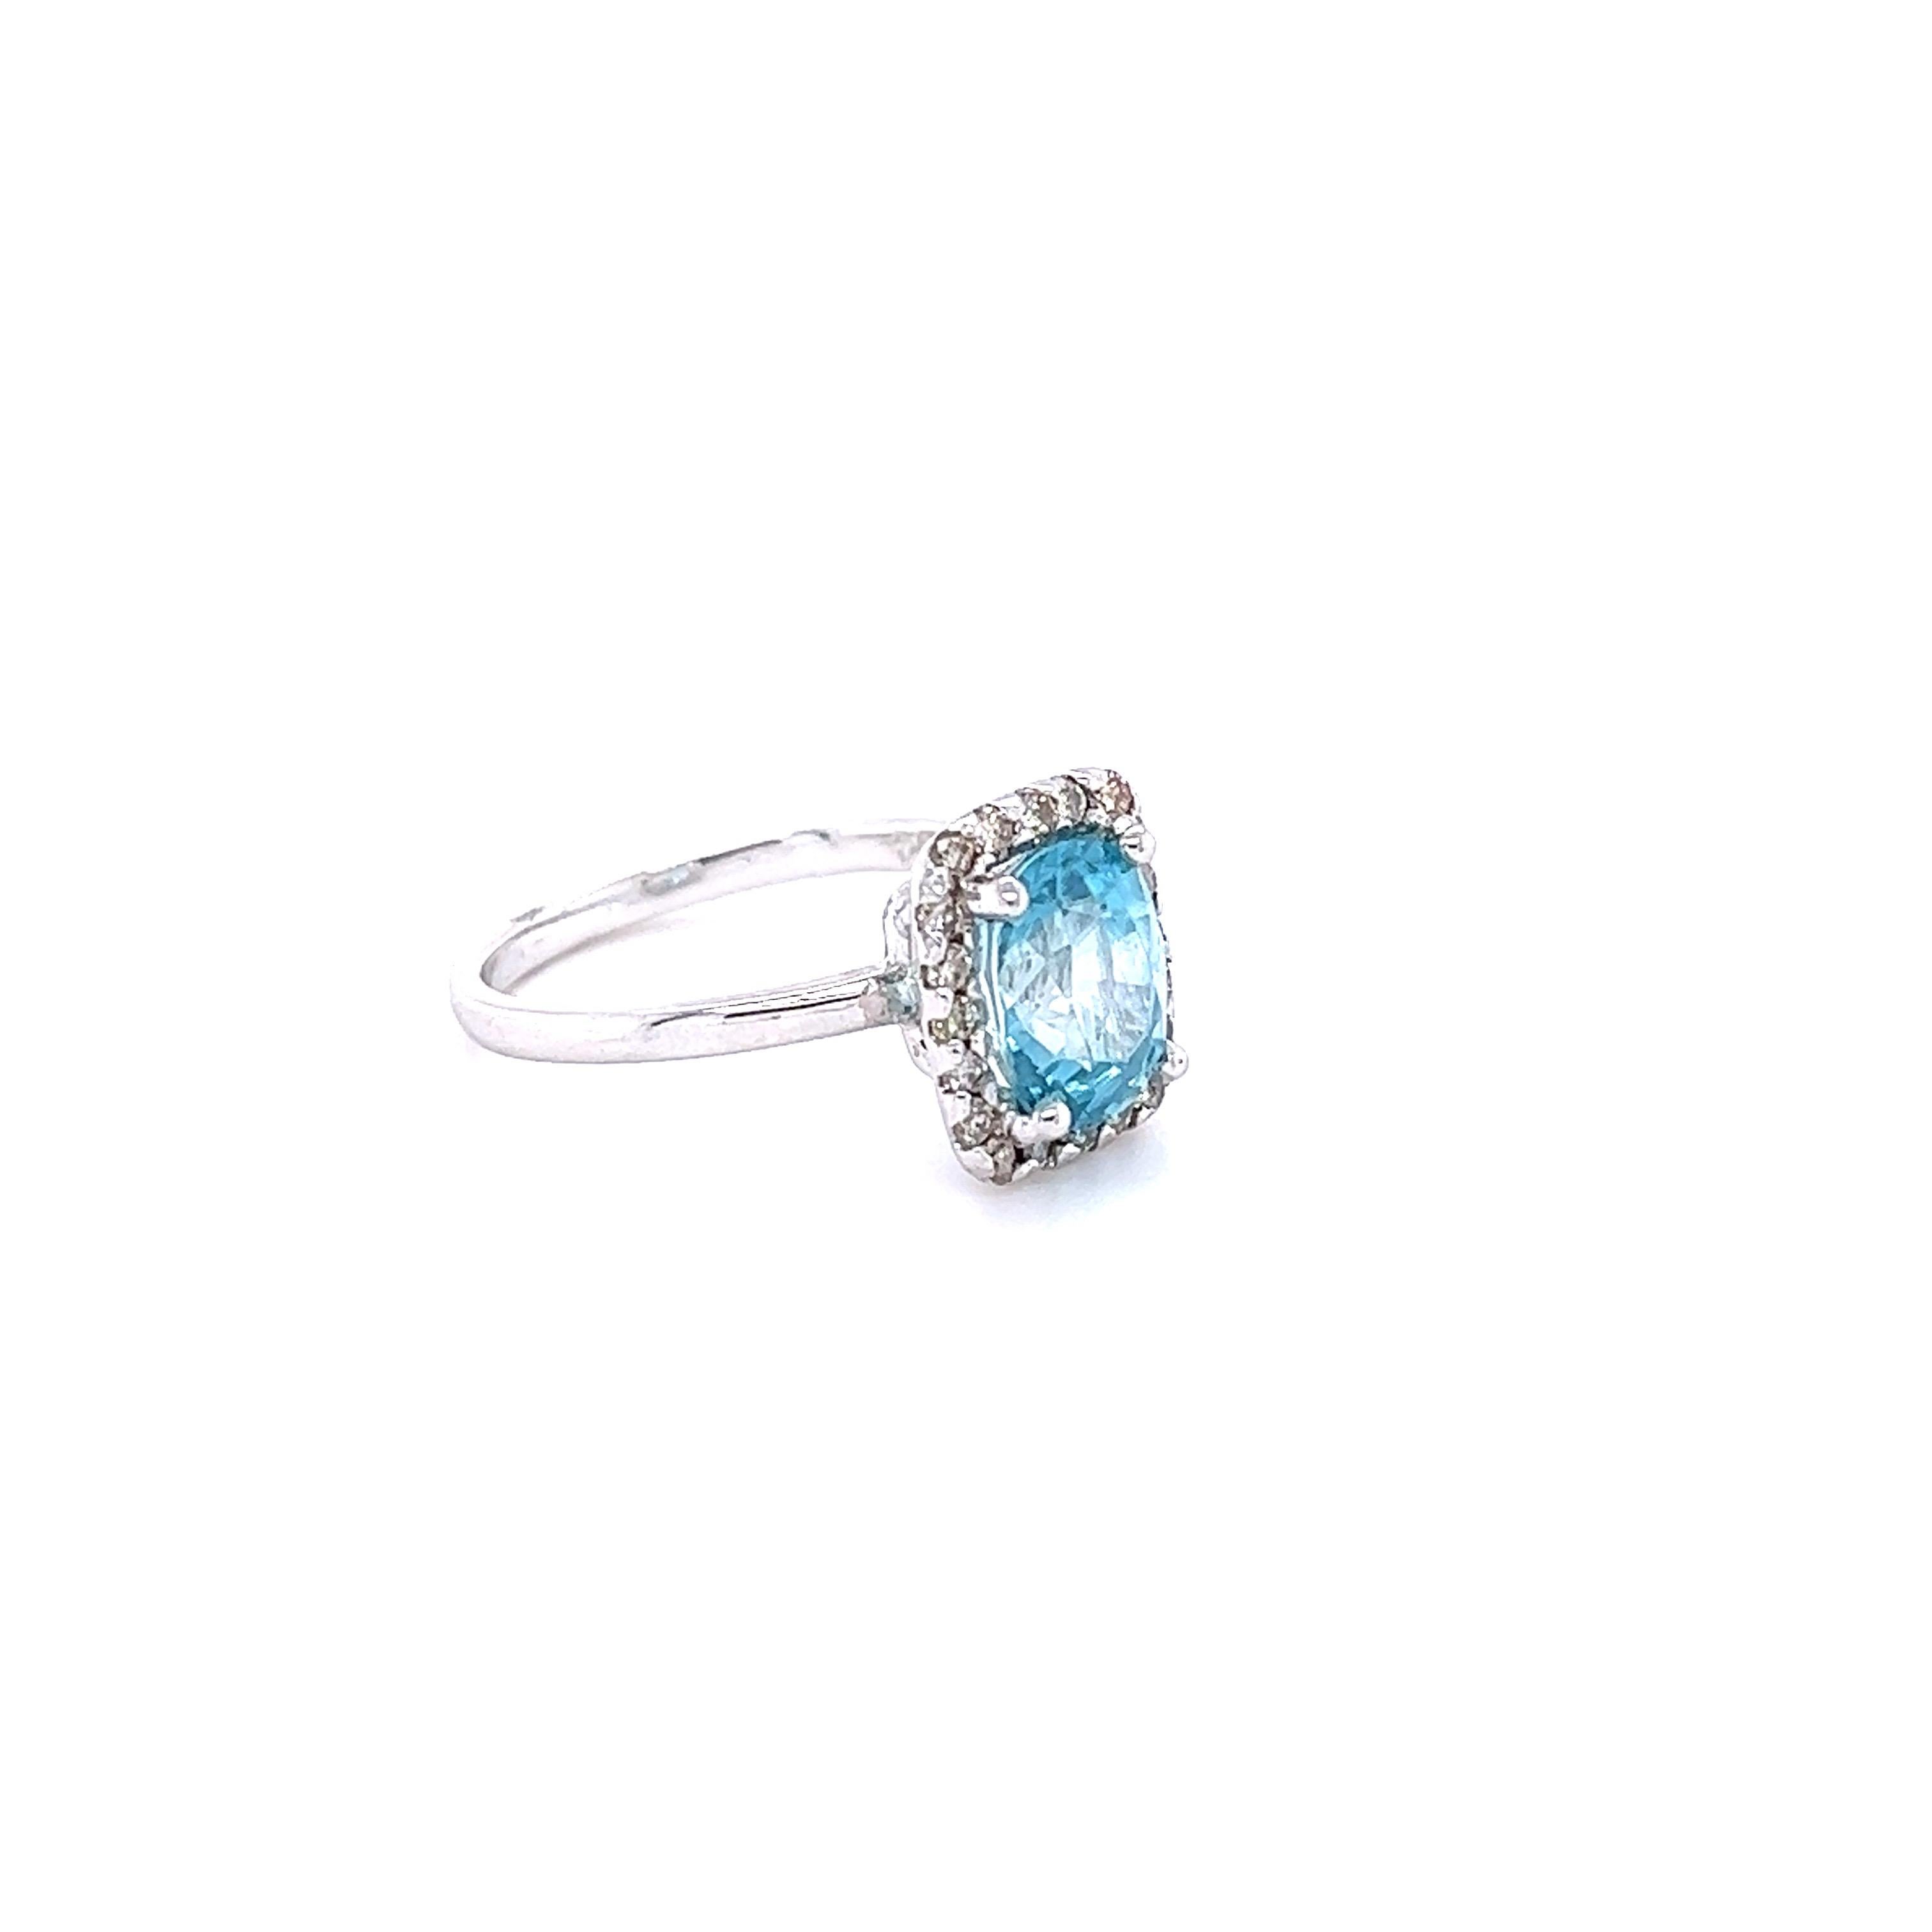 Blue Zircon is a natural stone mined mainly in Sri Lanka, Myanmar, and Australia.  
This ring has a Oval Cut Blue Zircon that weighs 3.09 carats measures at 9 mm x 7 mm. It is surrounded by Natural Round Cut Diamonds that weigh 0.33 Carats. Clarity: